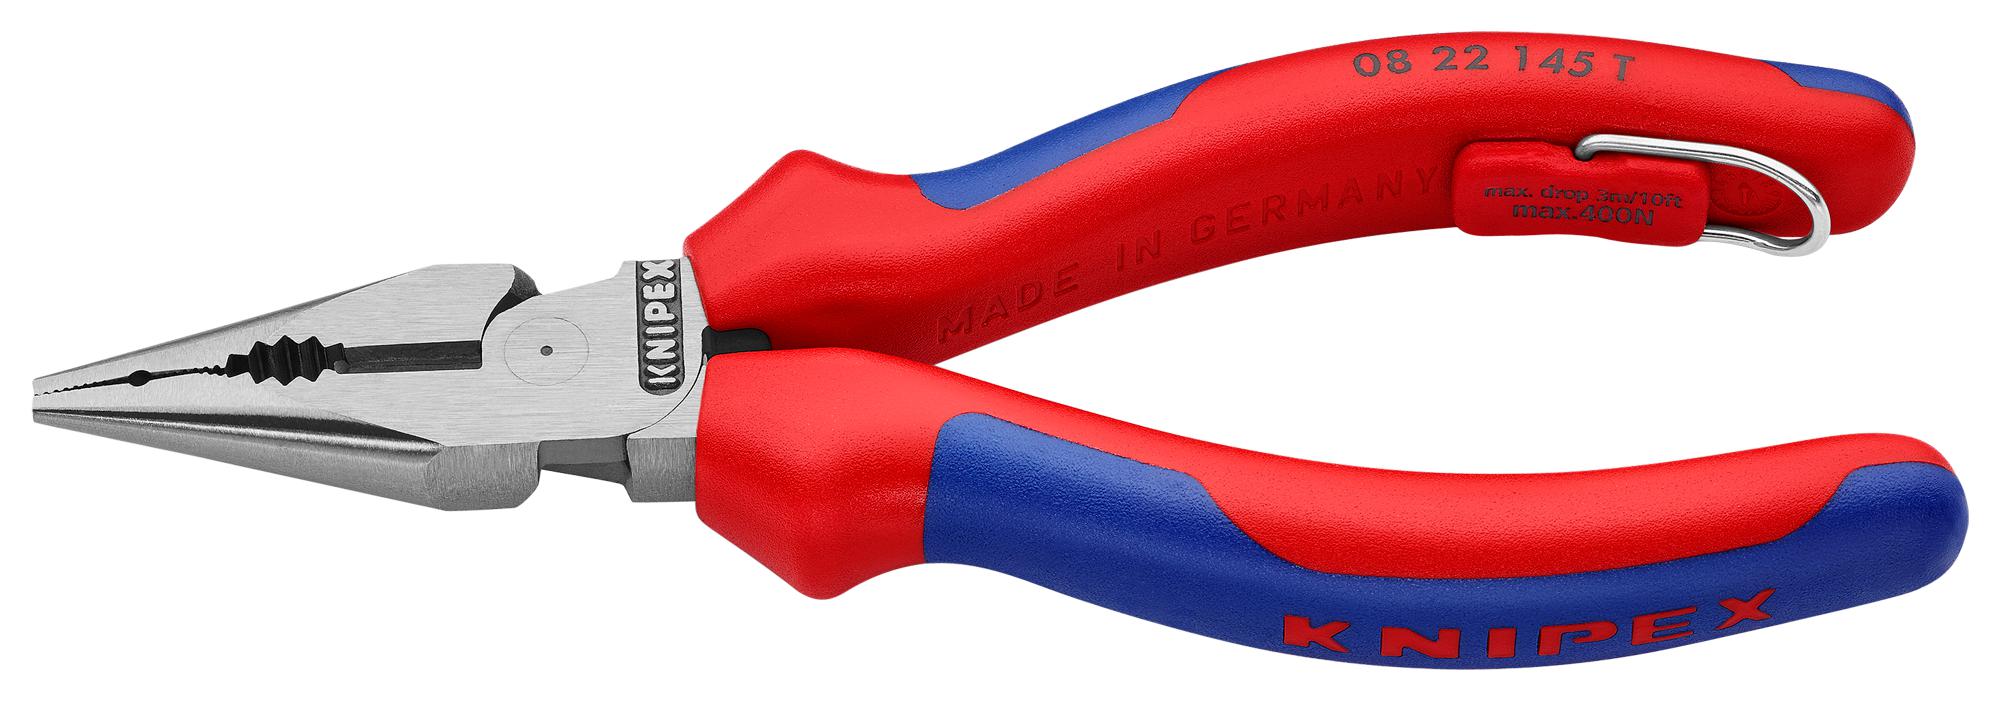 08 22 145 T NEEDLE NOSE COMBO PLIER, 145MM, 16MM2 KNIPEX